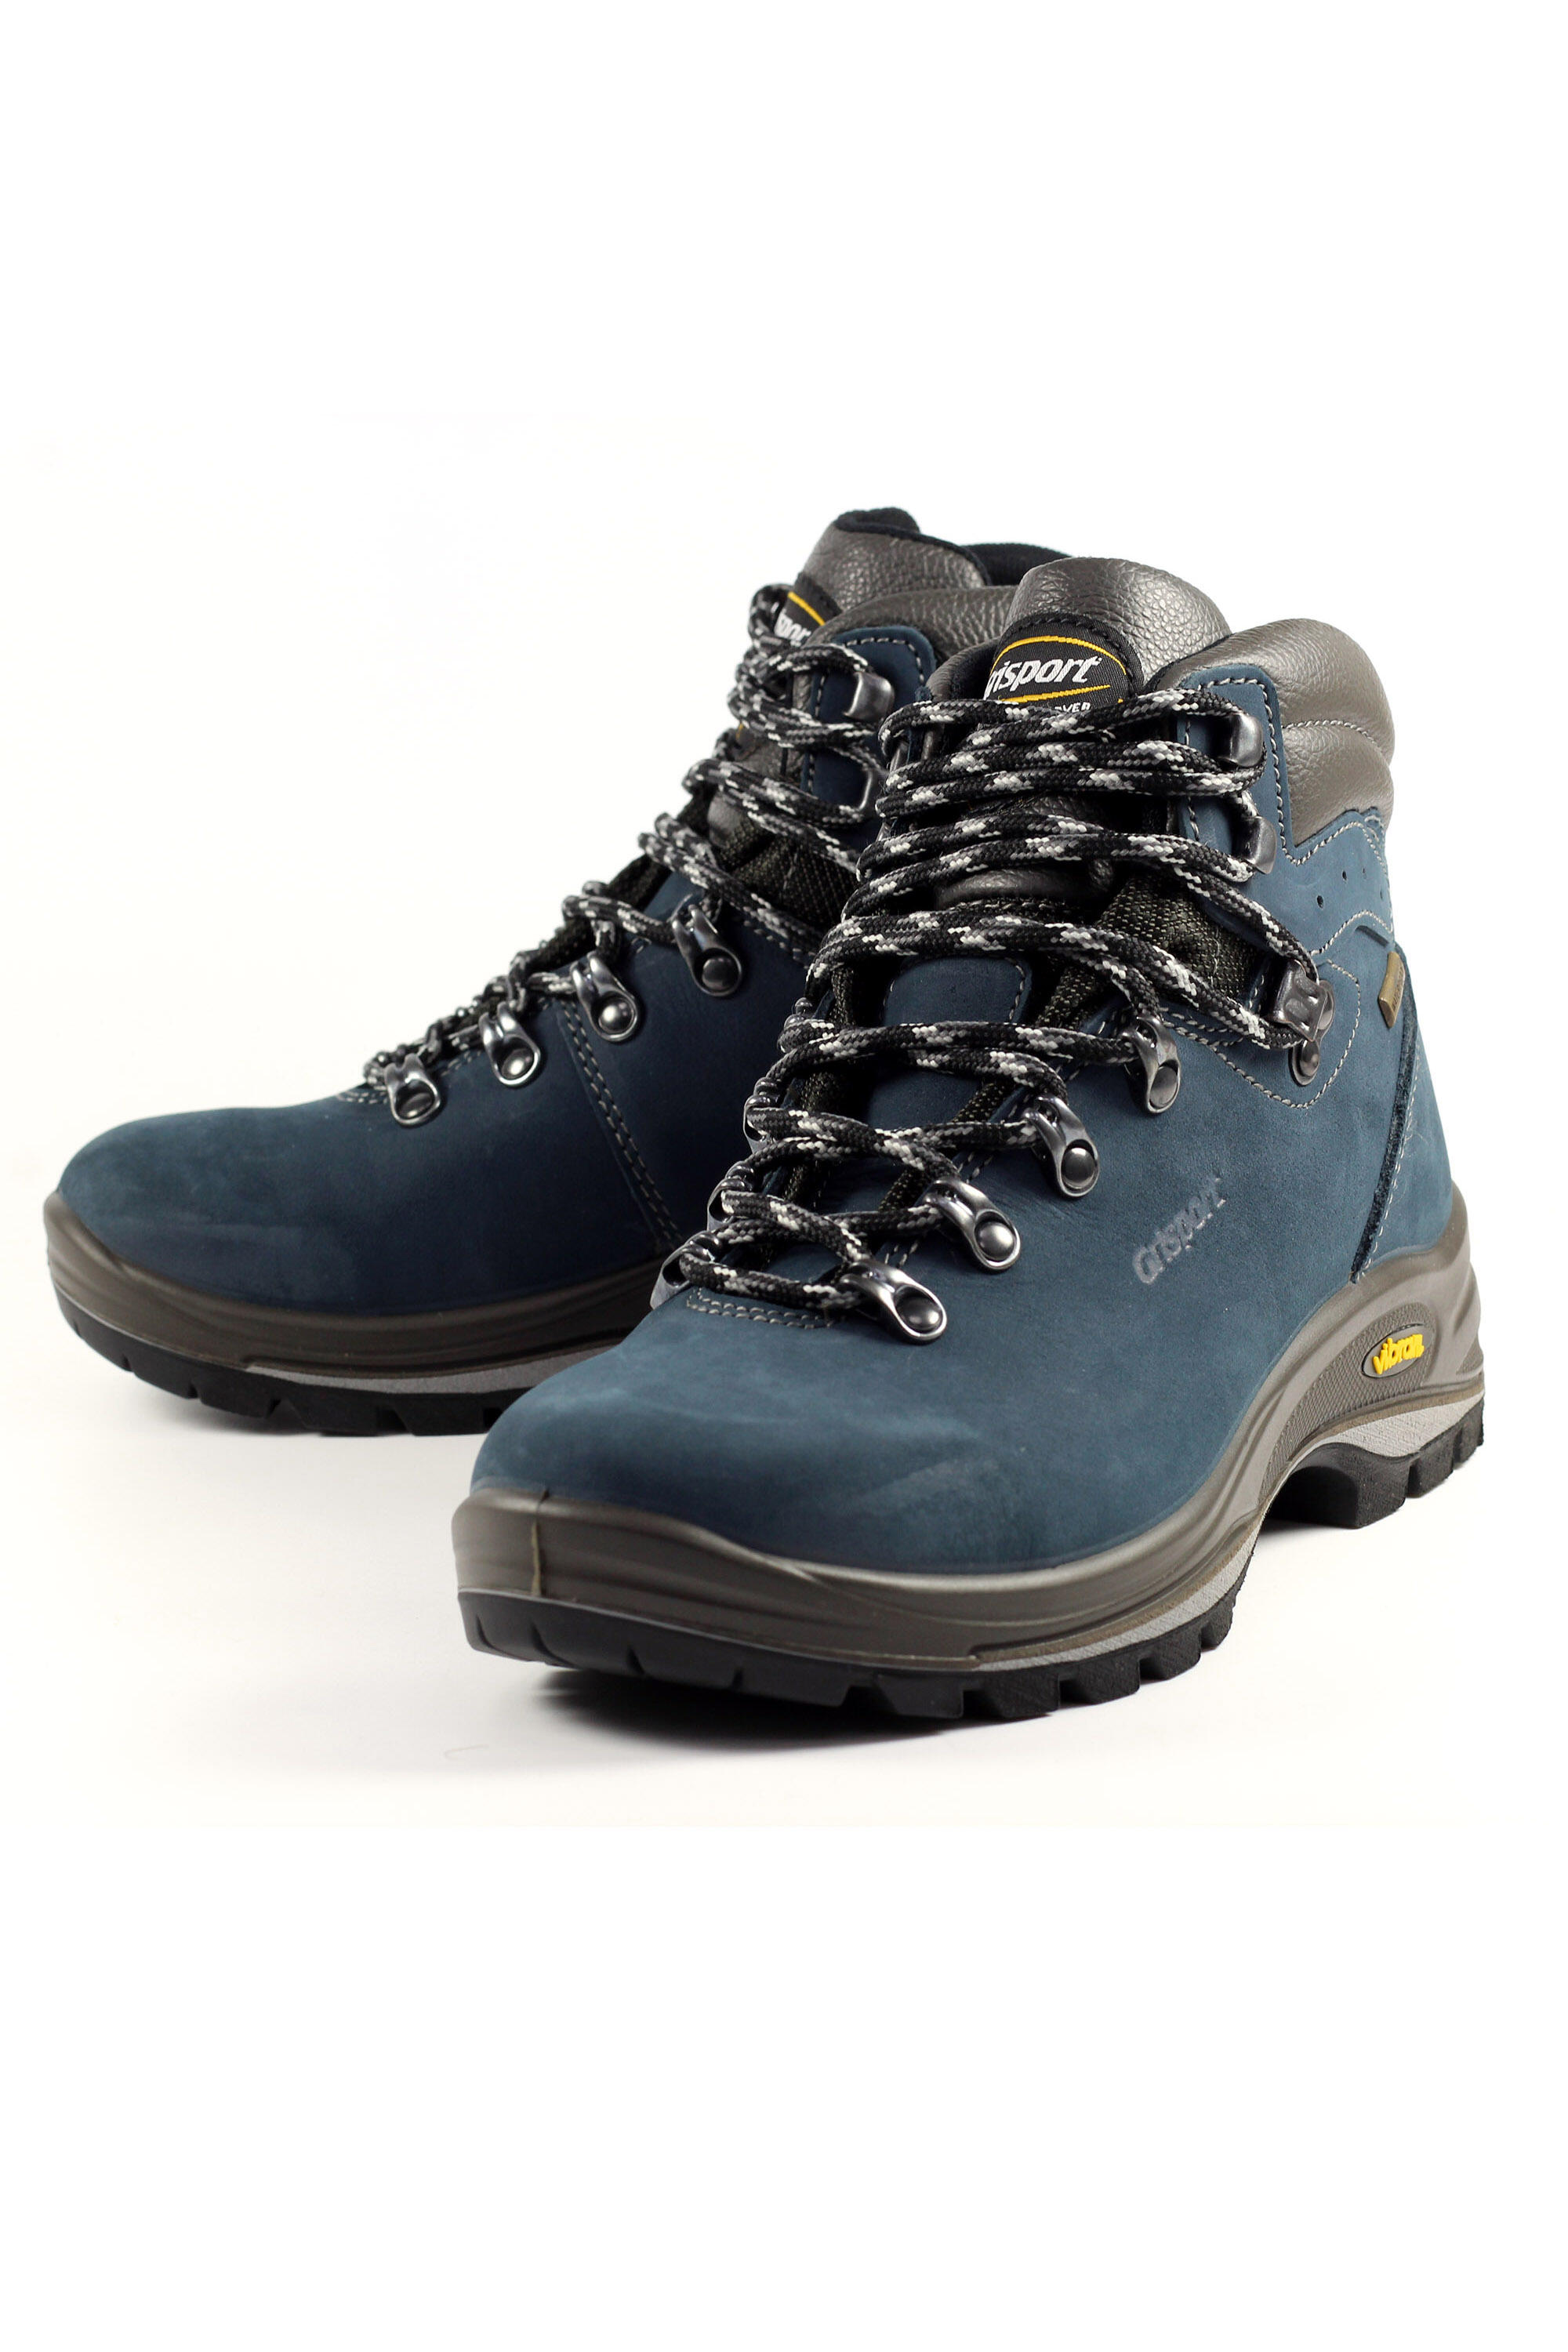 Lady Tempest Blue Waterproof Hiking Boot 4/5